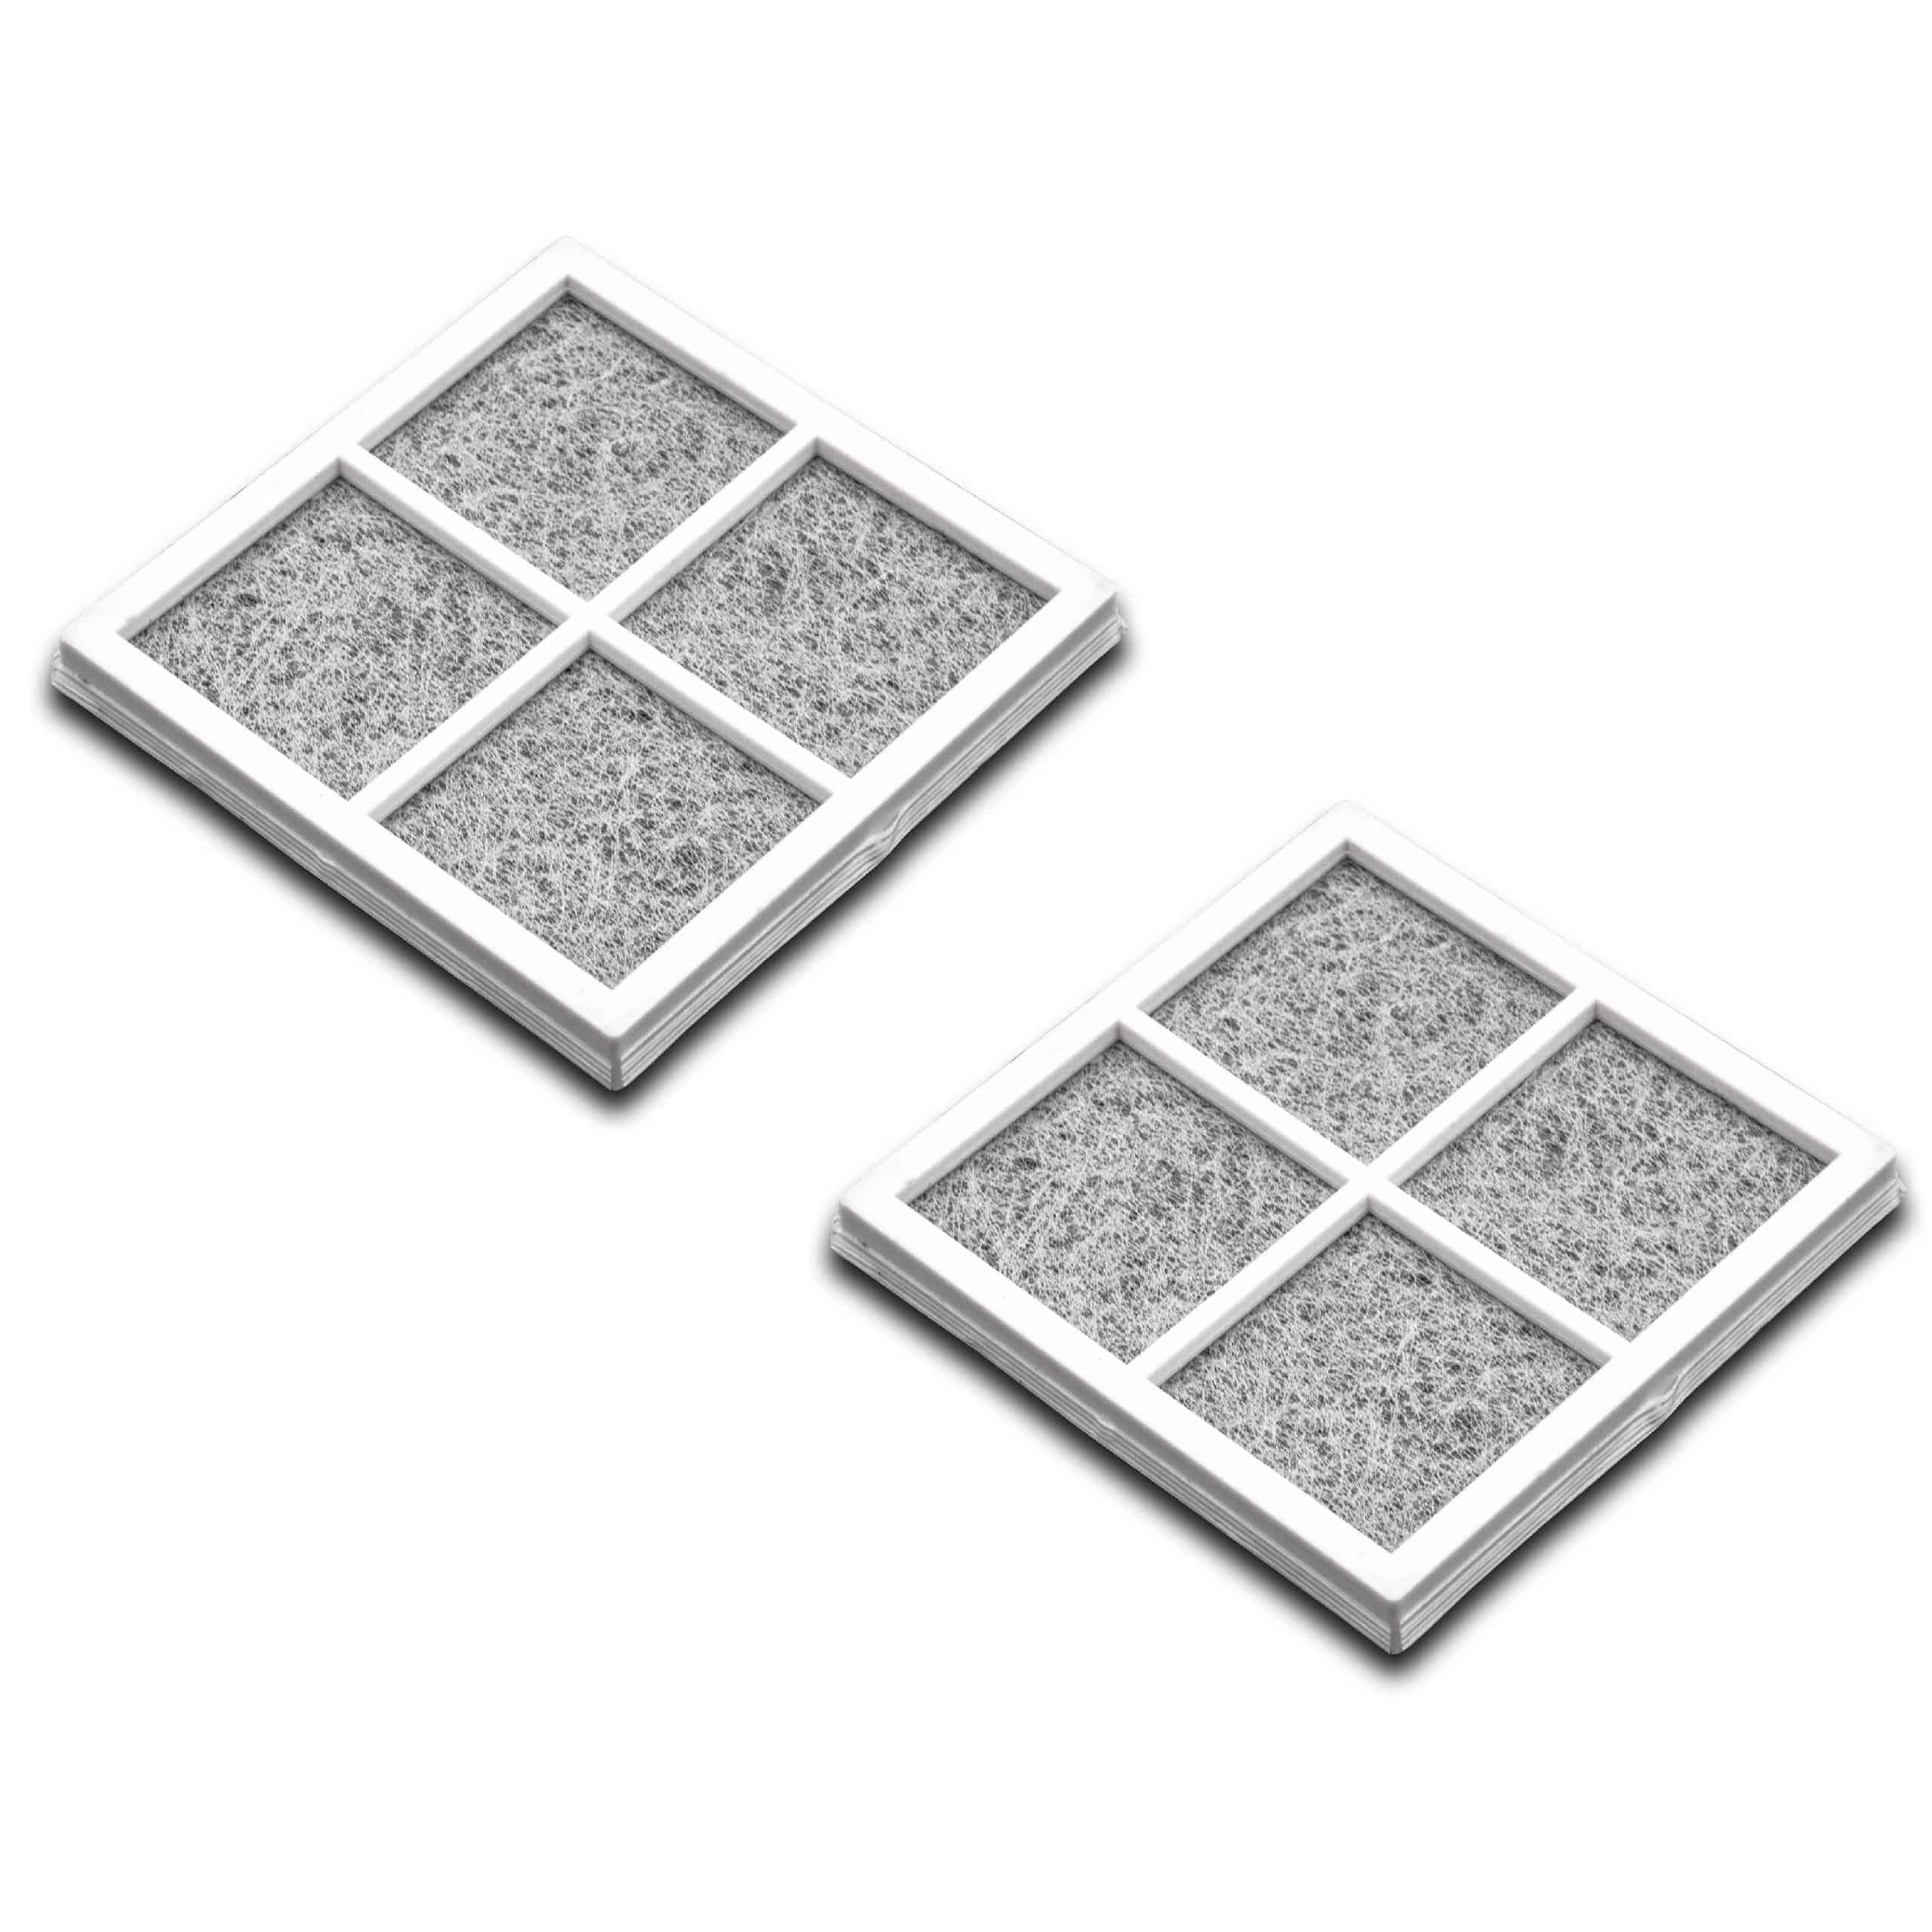 2x Activated Carbon Filter replaces LG ADQ73334008, ADQ73214404, LT120F for LG Refrigerator